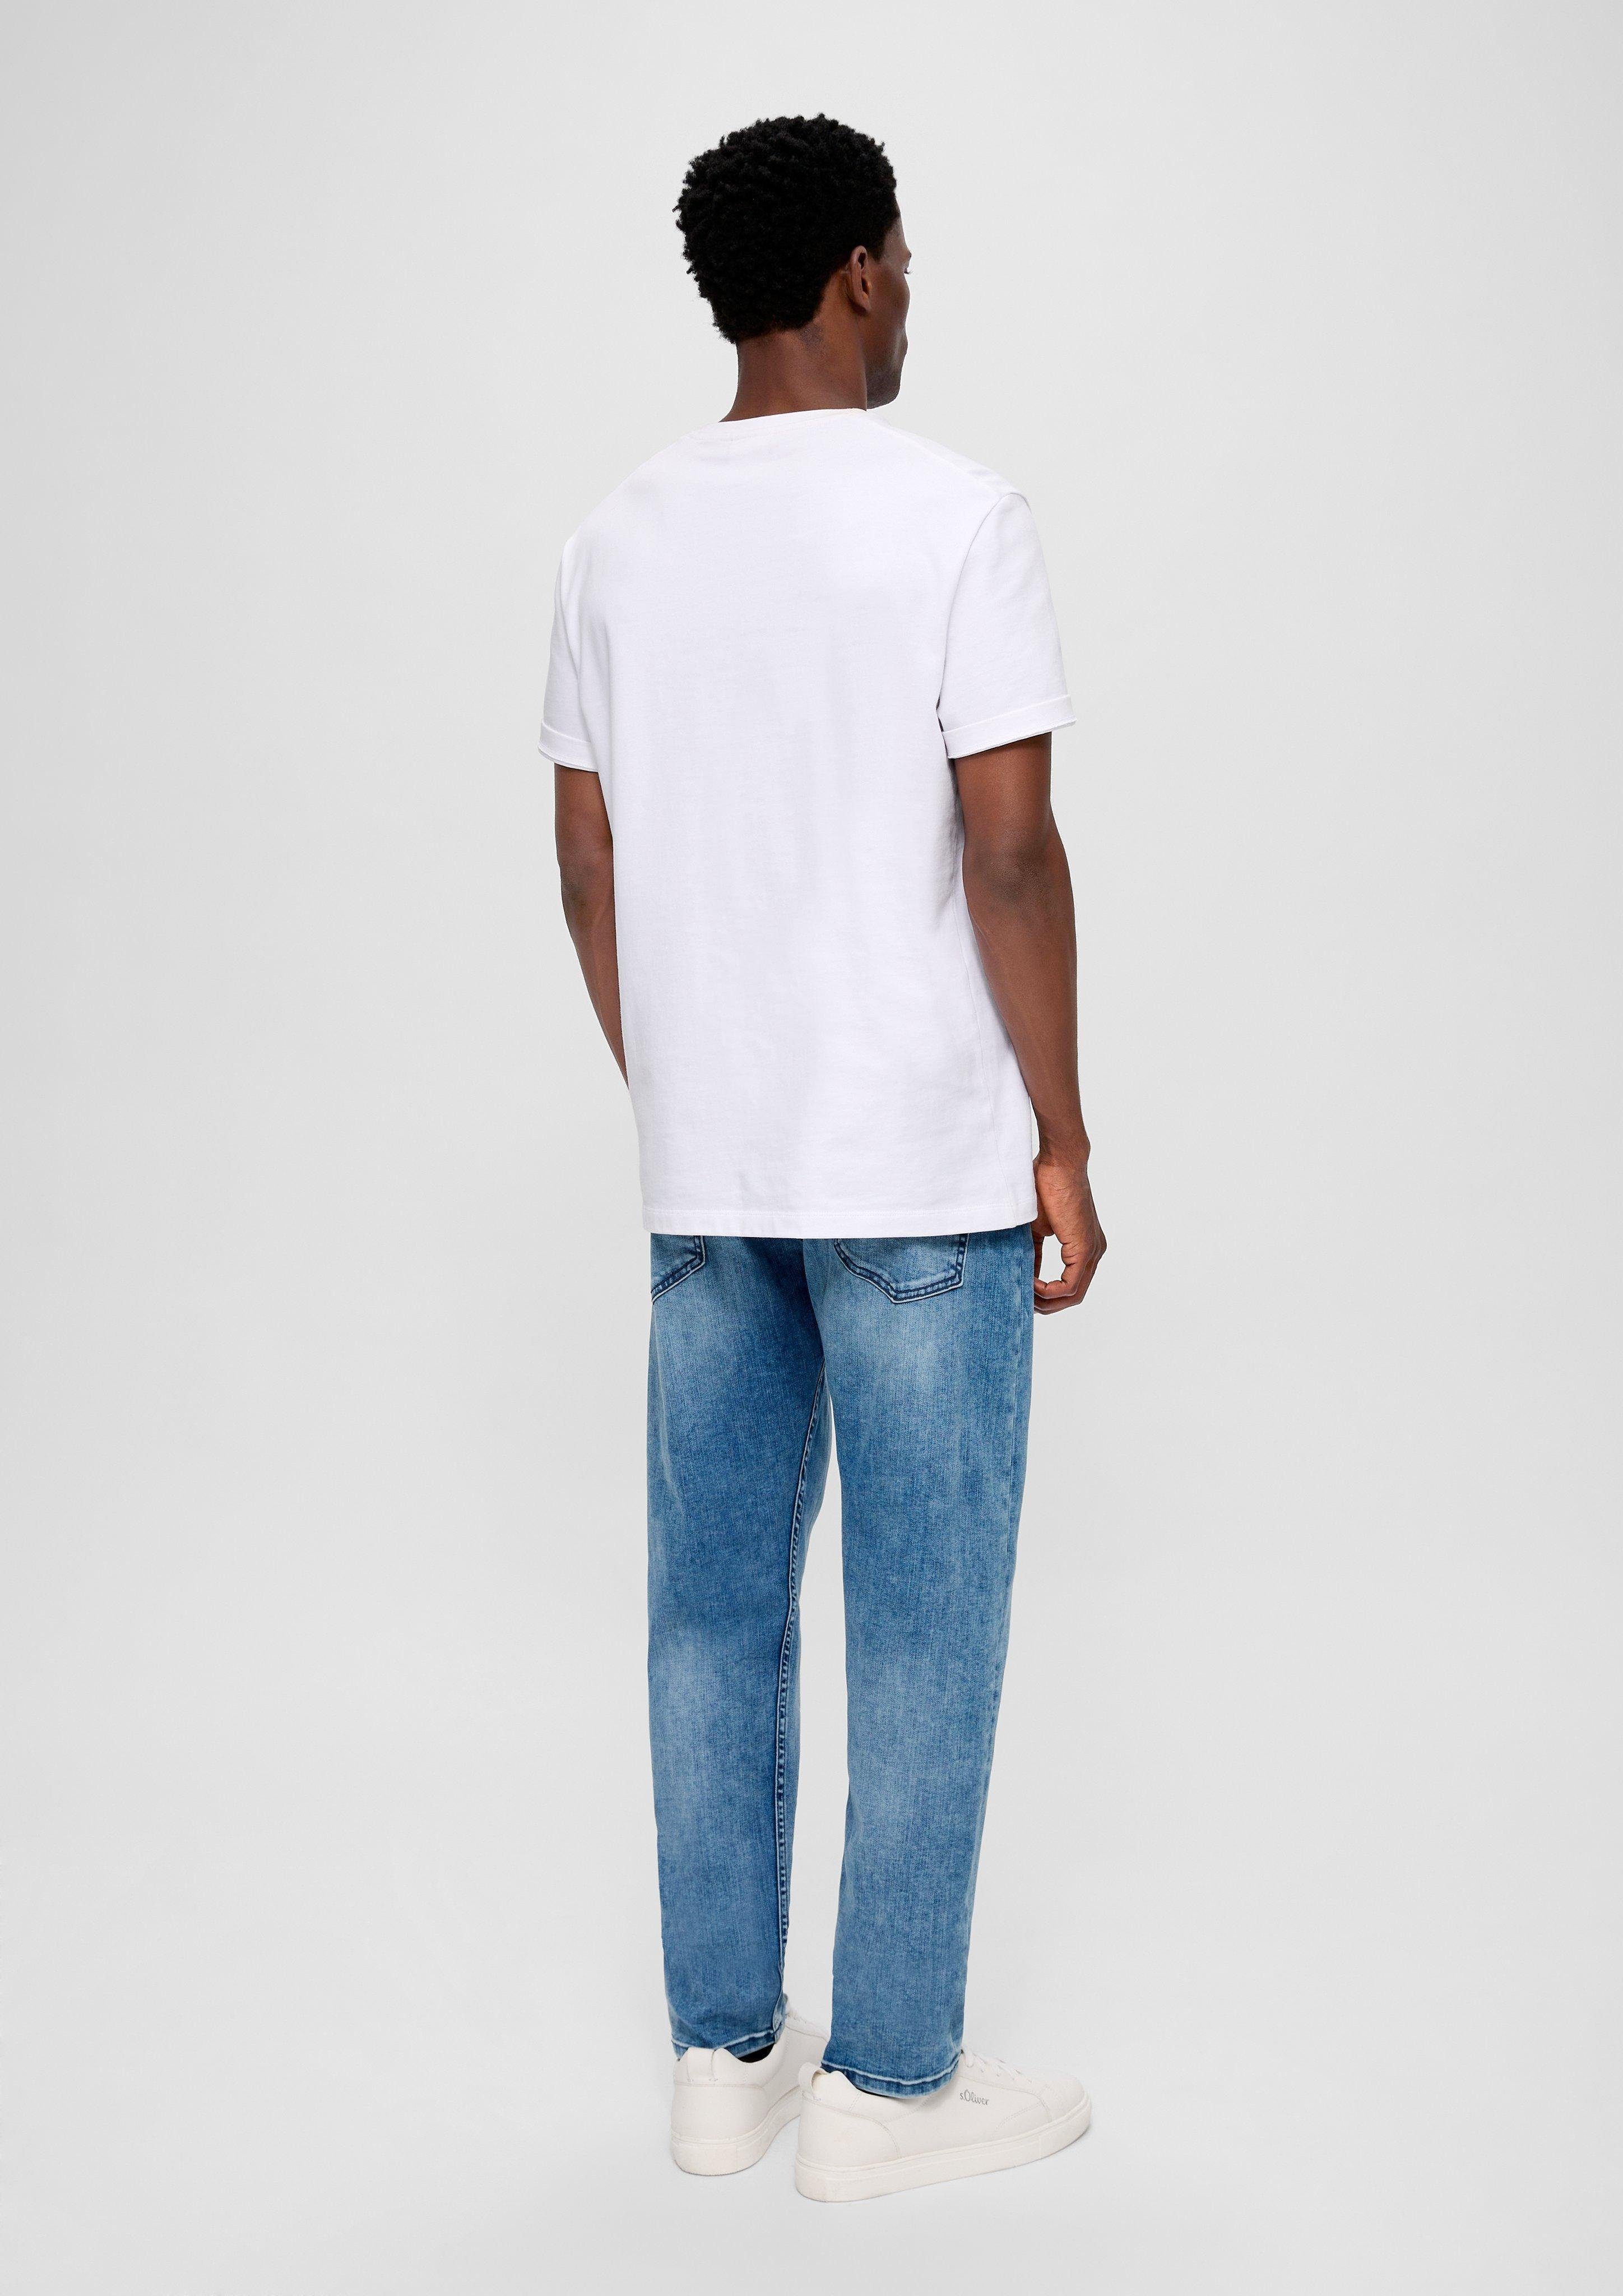 Rise Stoffhose Tapered / Jeans Label-Patch, High / / s.Oliver Leg Mauro Regular Fit Waschung